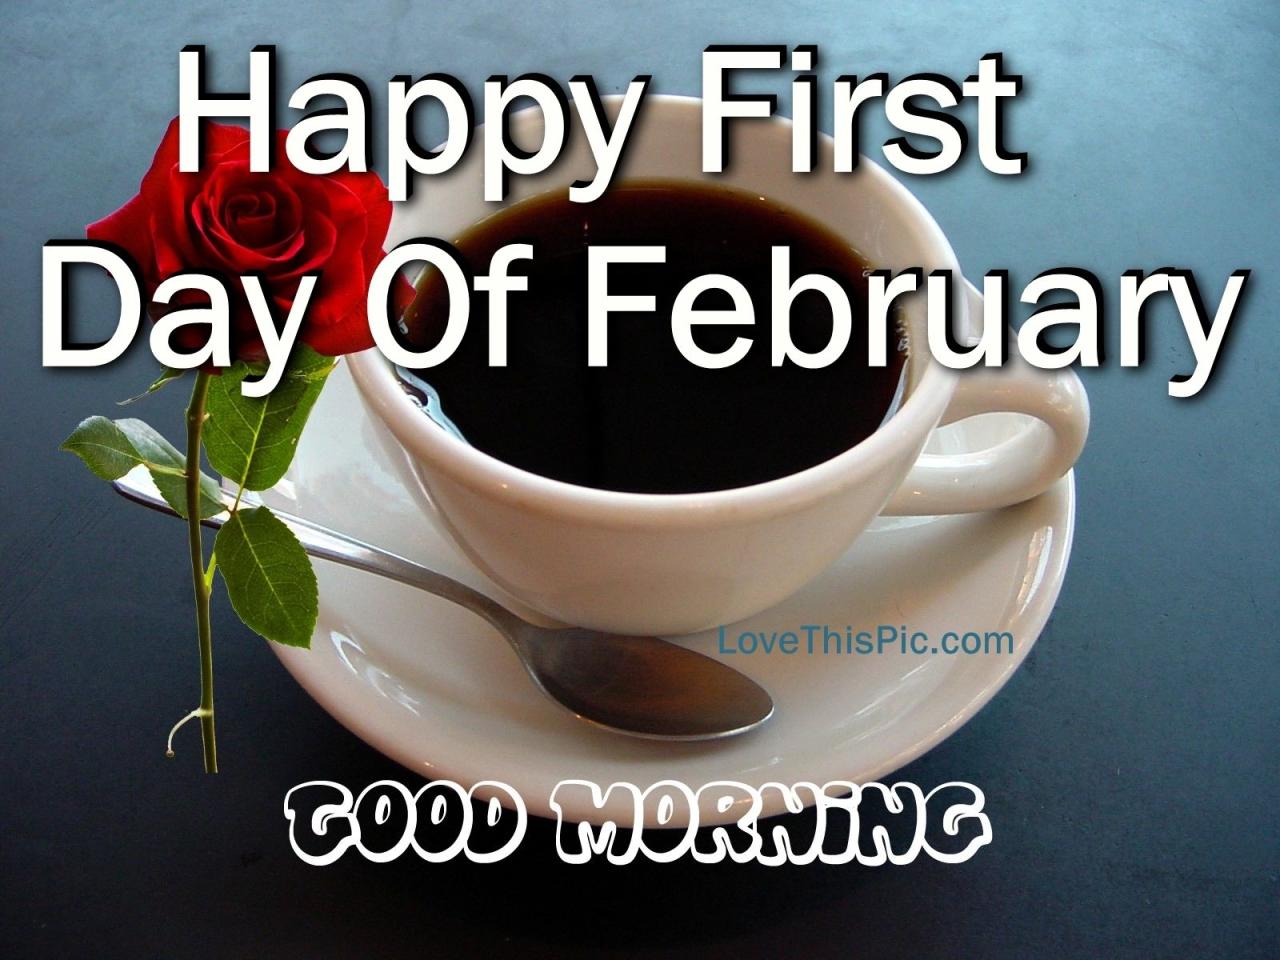 good morning happy 1st day of february wishes terbaru